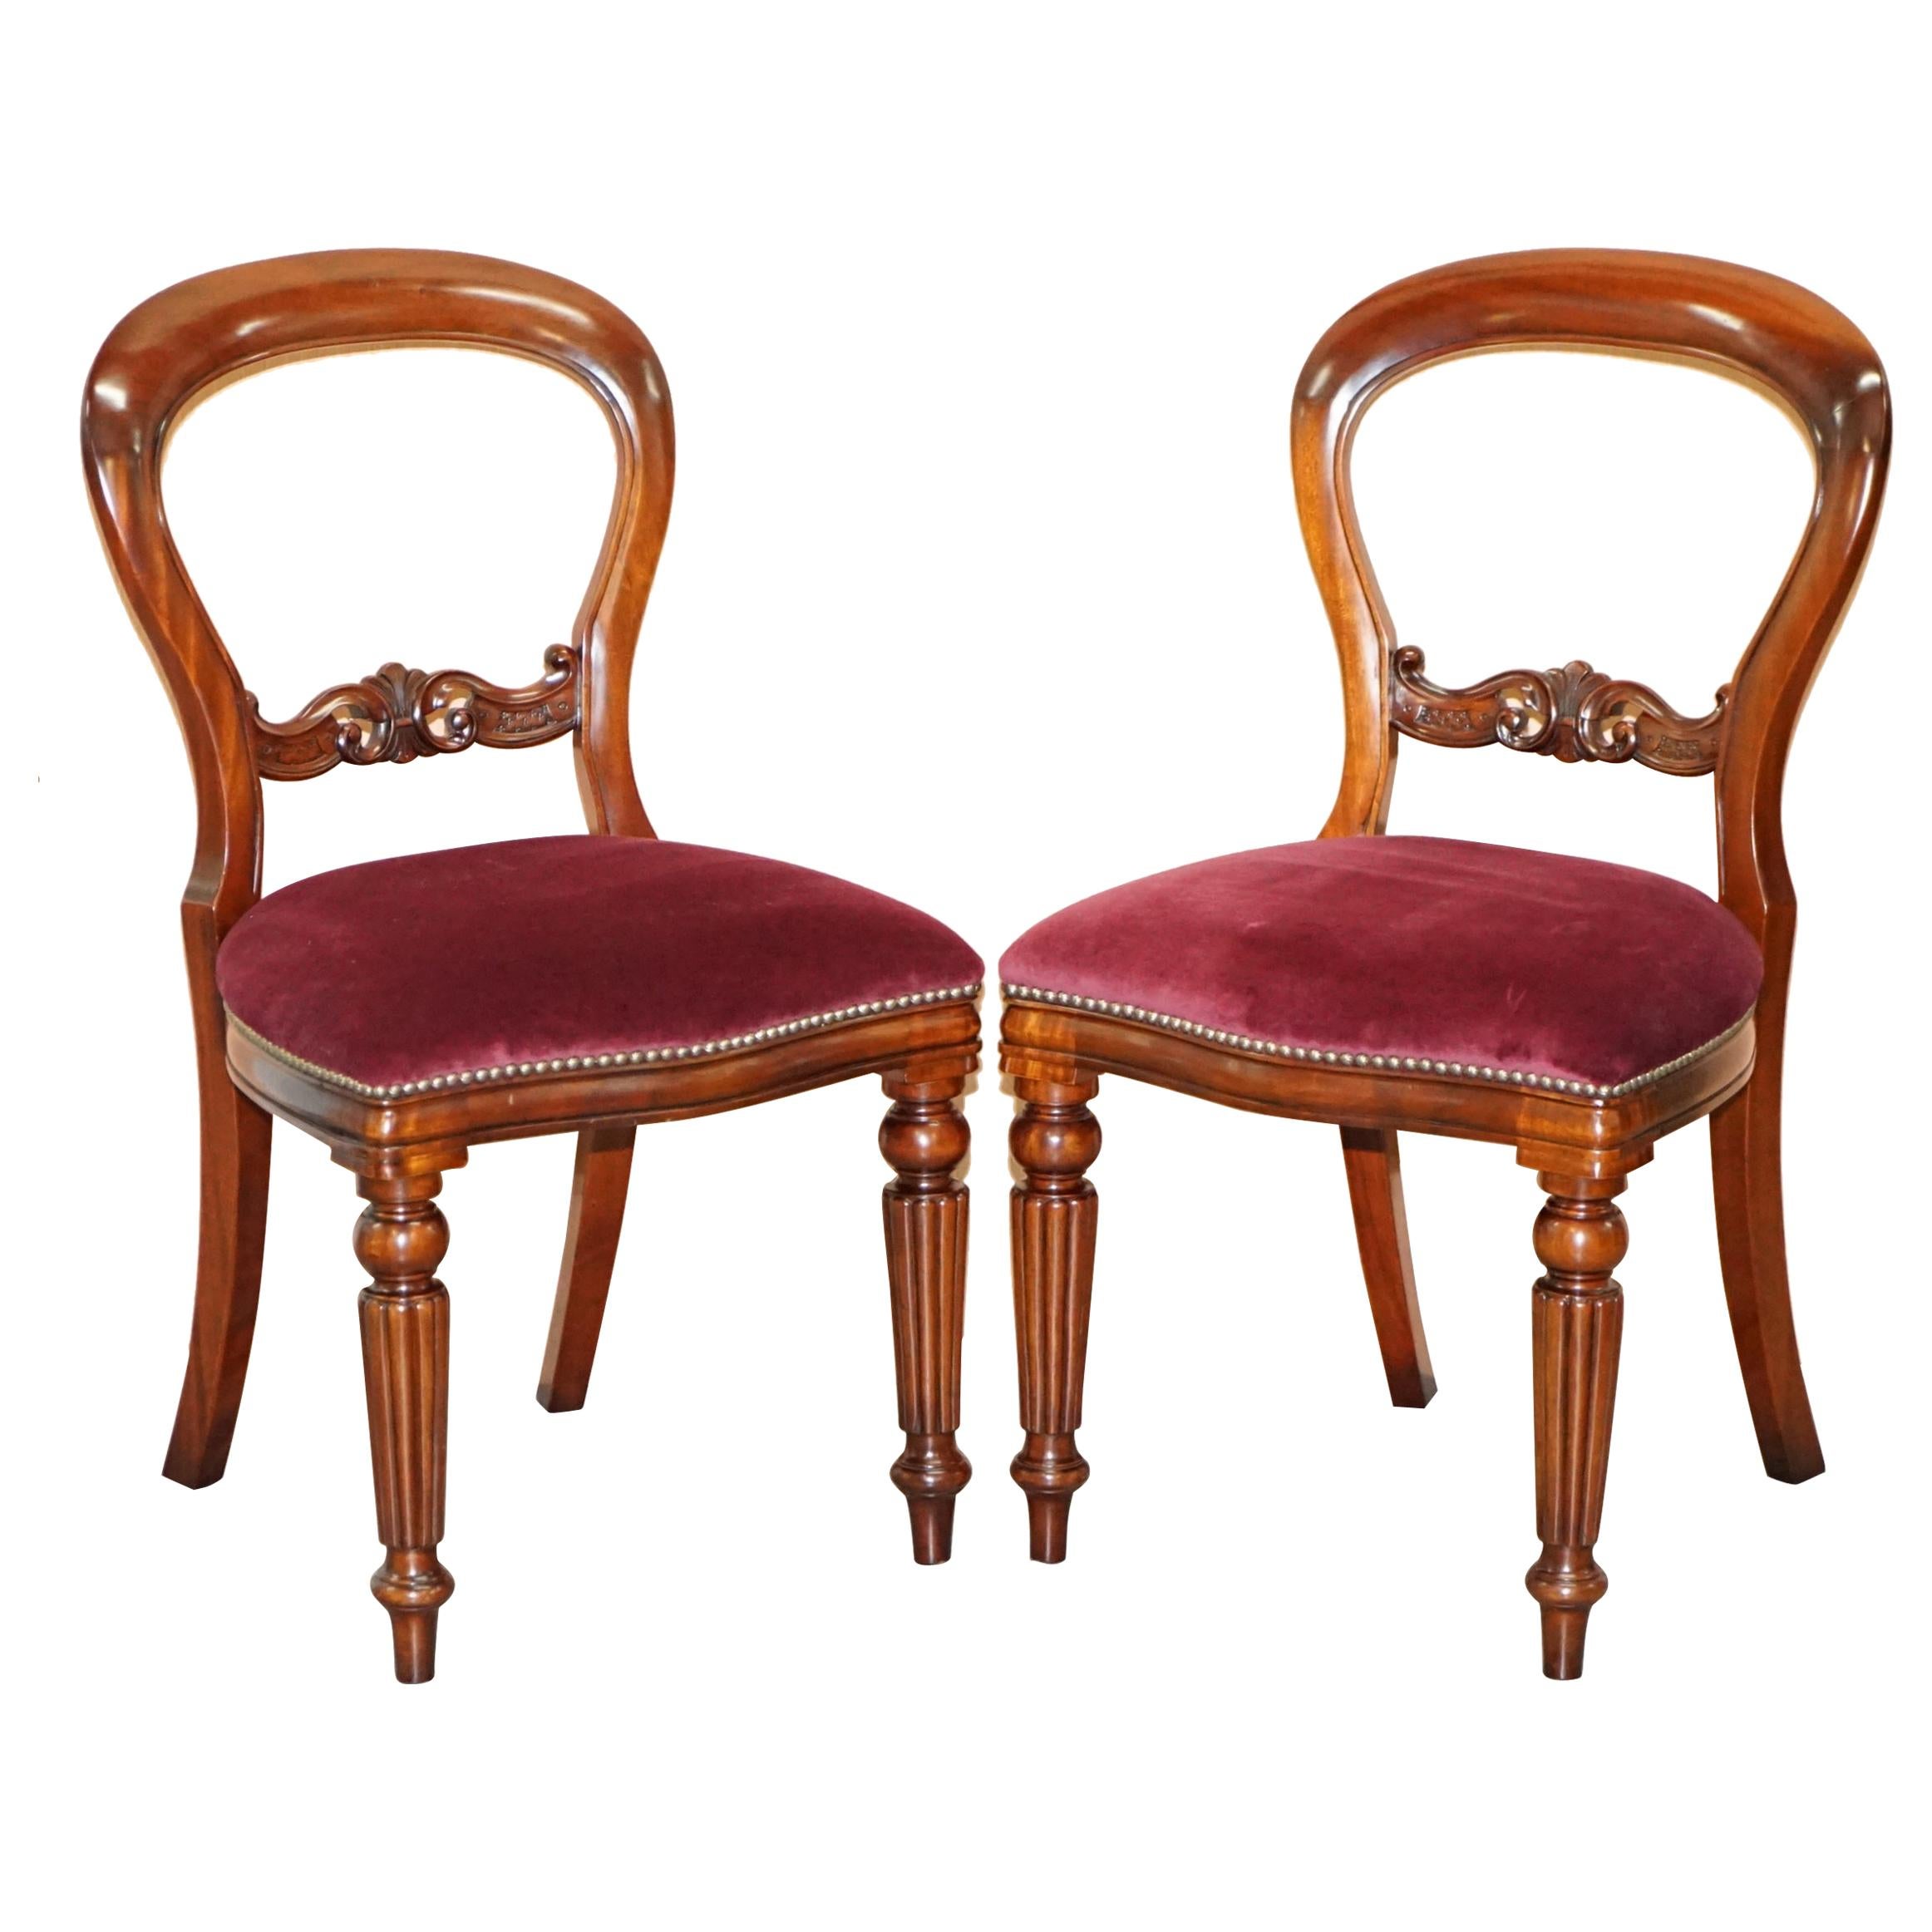 Pair of Frank Hudson & Sons Harrods Stamped Medallion Hardwood Dining Chairs